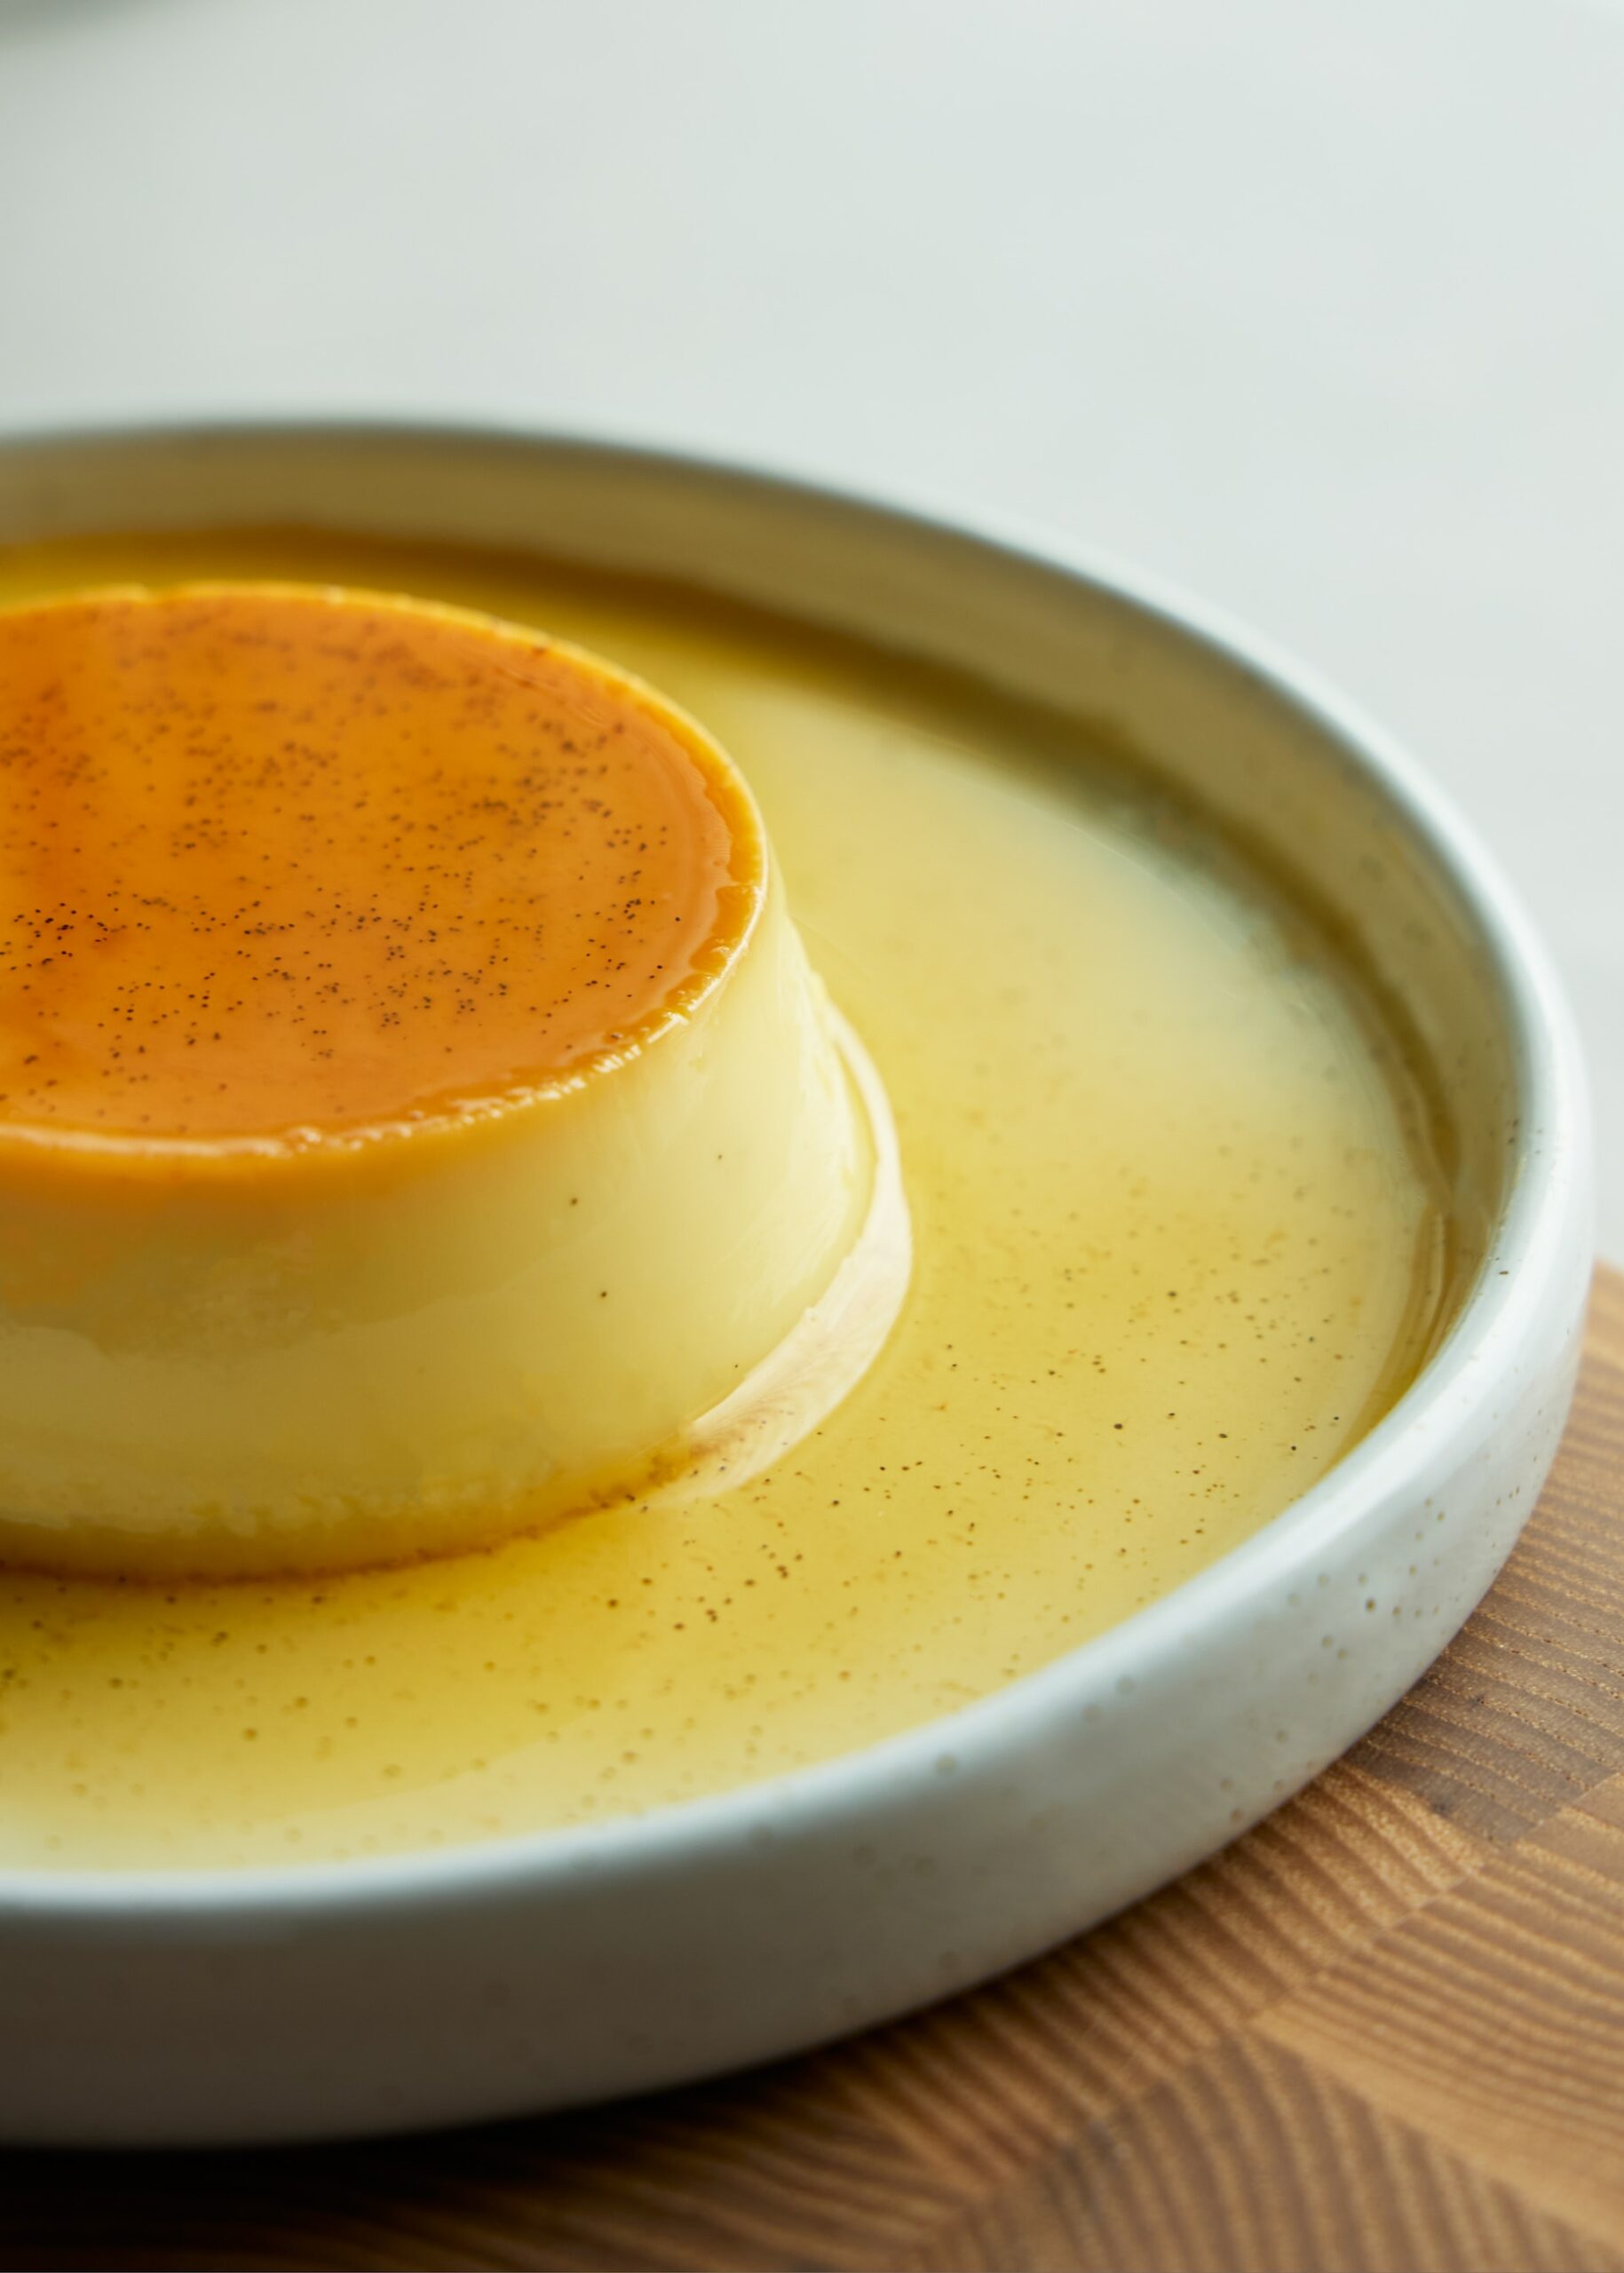 If you've never had flan before, discover the magic of this silky smooth dessert with the help of your microwave. Whisk together 2 eggs, 1 can of condensed milk, and 1 teaspoon of vanilla extract. Pour into ramekins lined with caramel sauce before microwaving on medium power for about 9 minutes. Chill before serving and enjoy this scrumptious treat.